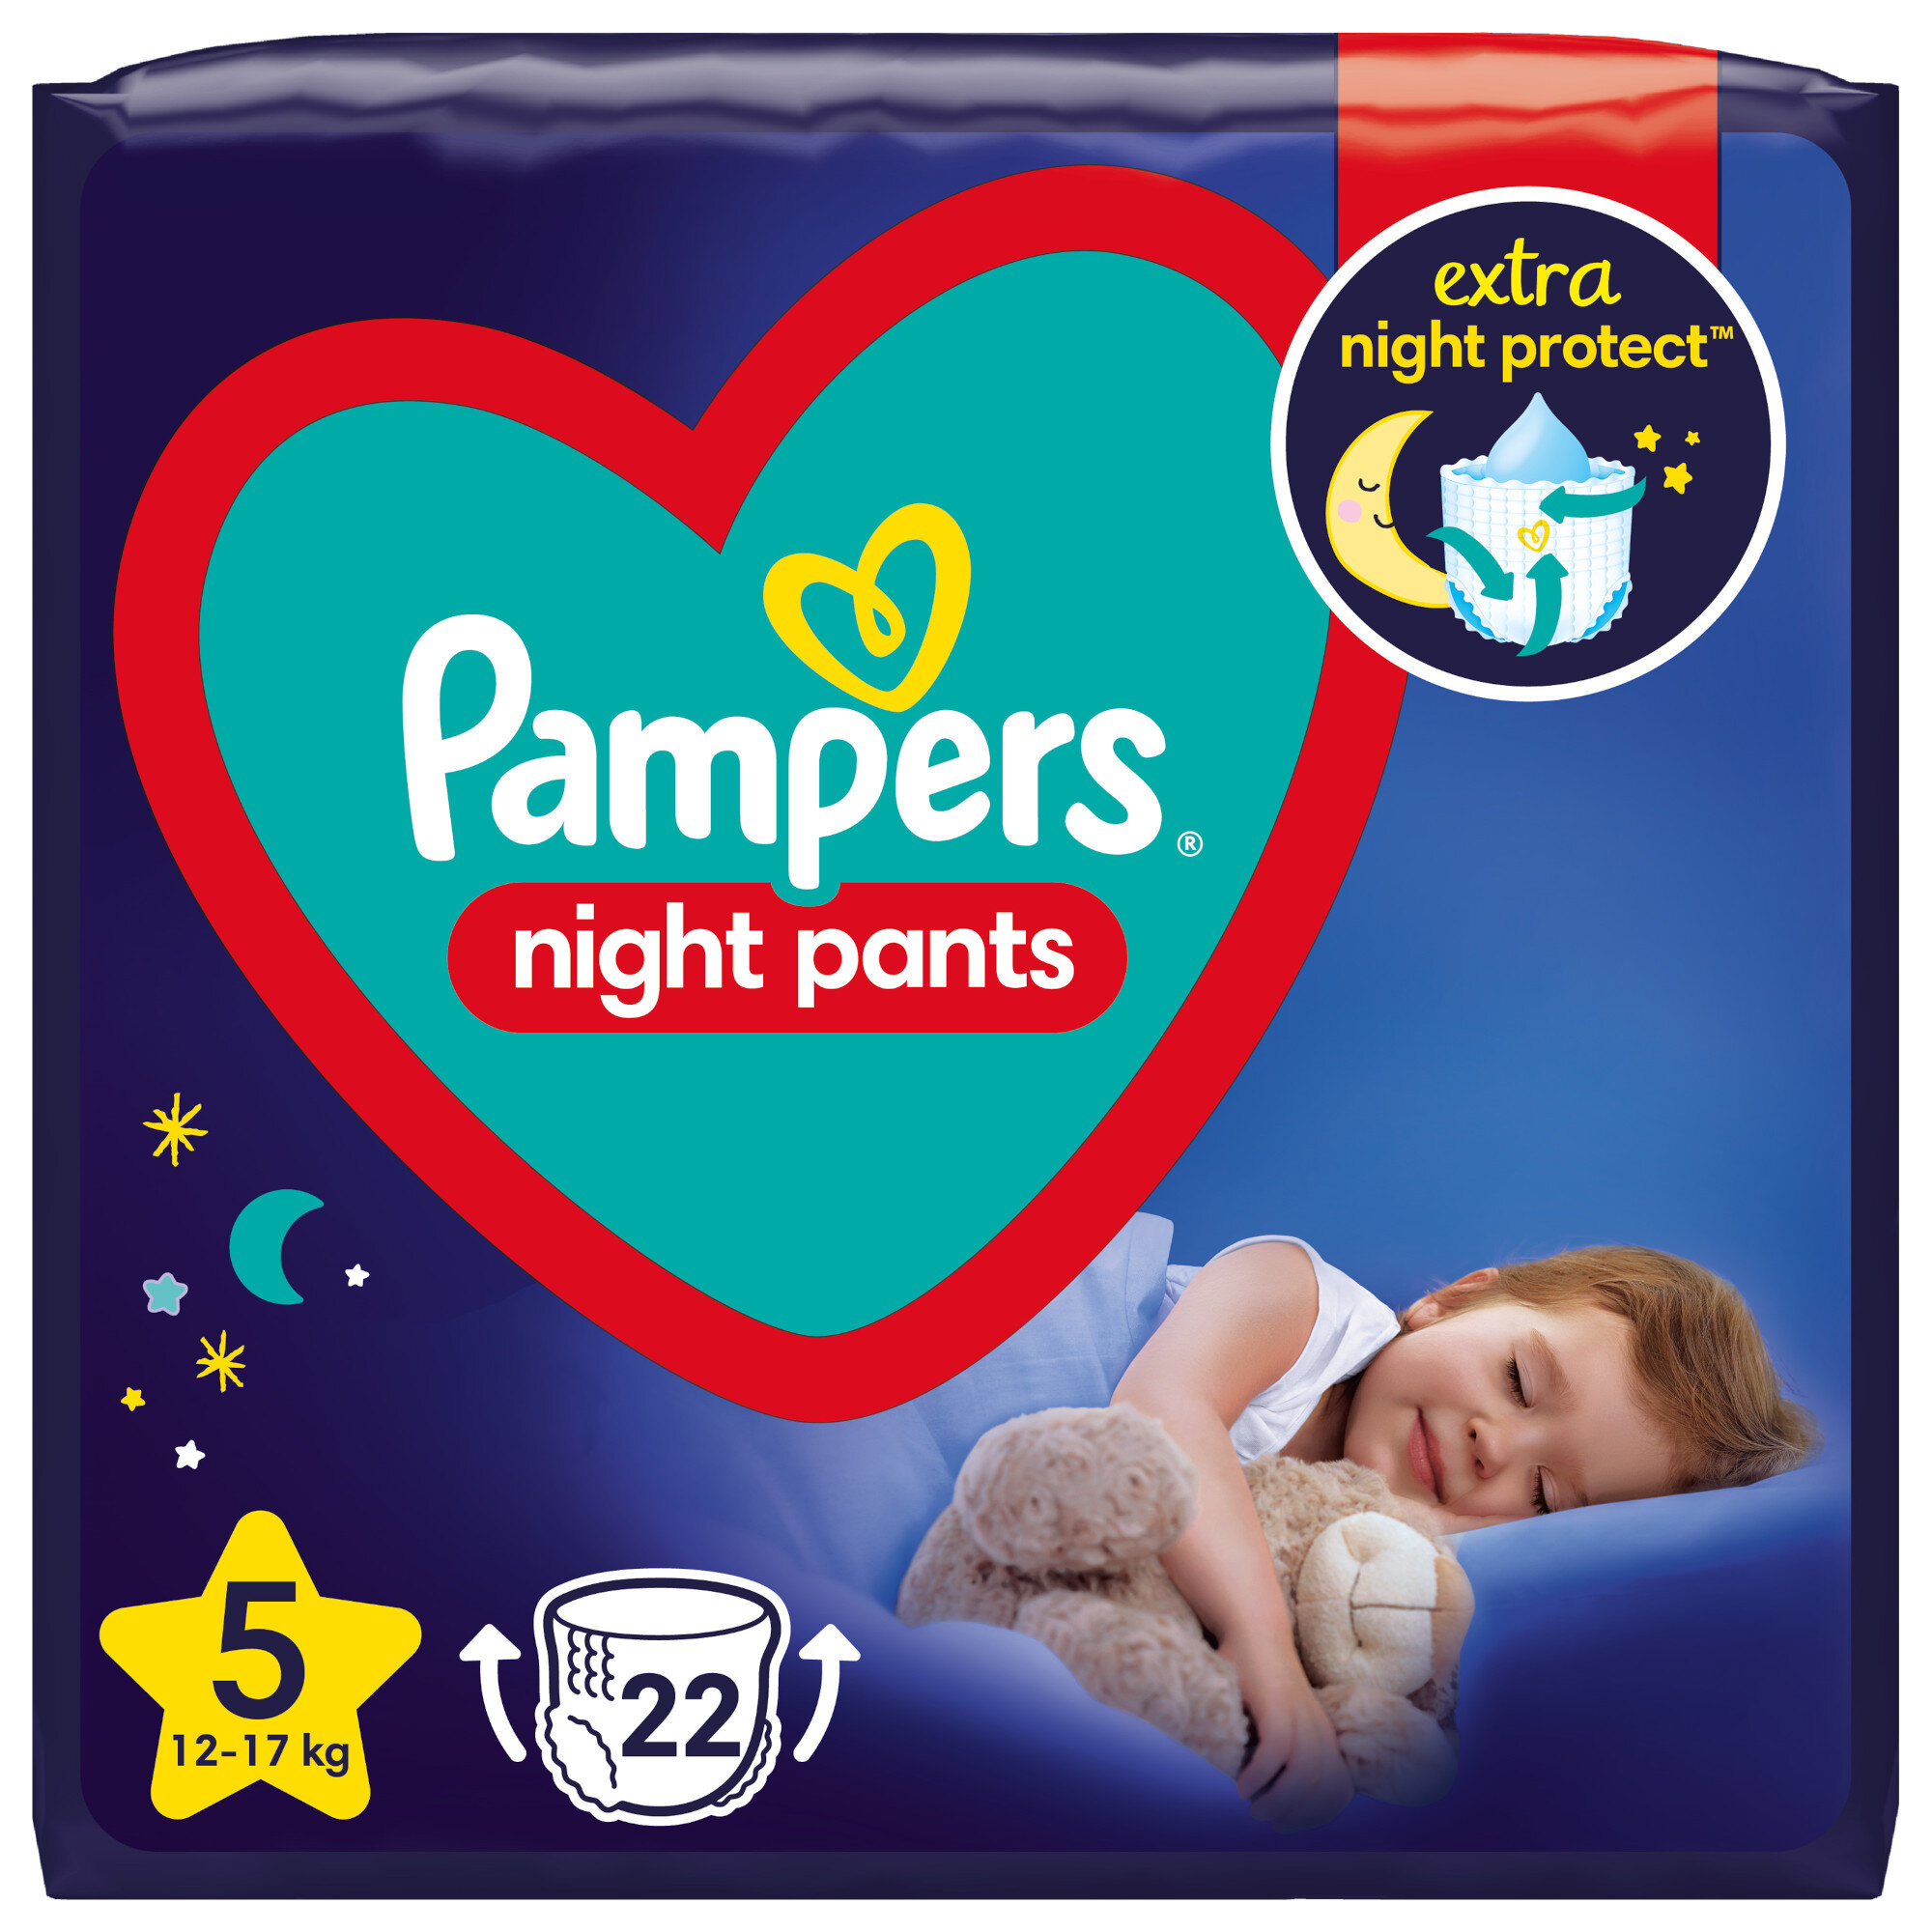 jala roznica pampers premium care a pampers premium care pants